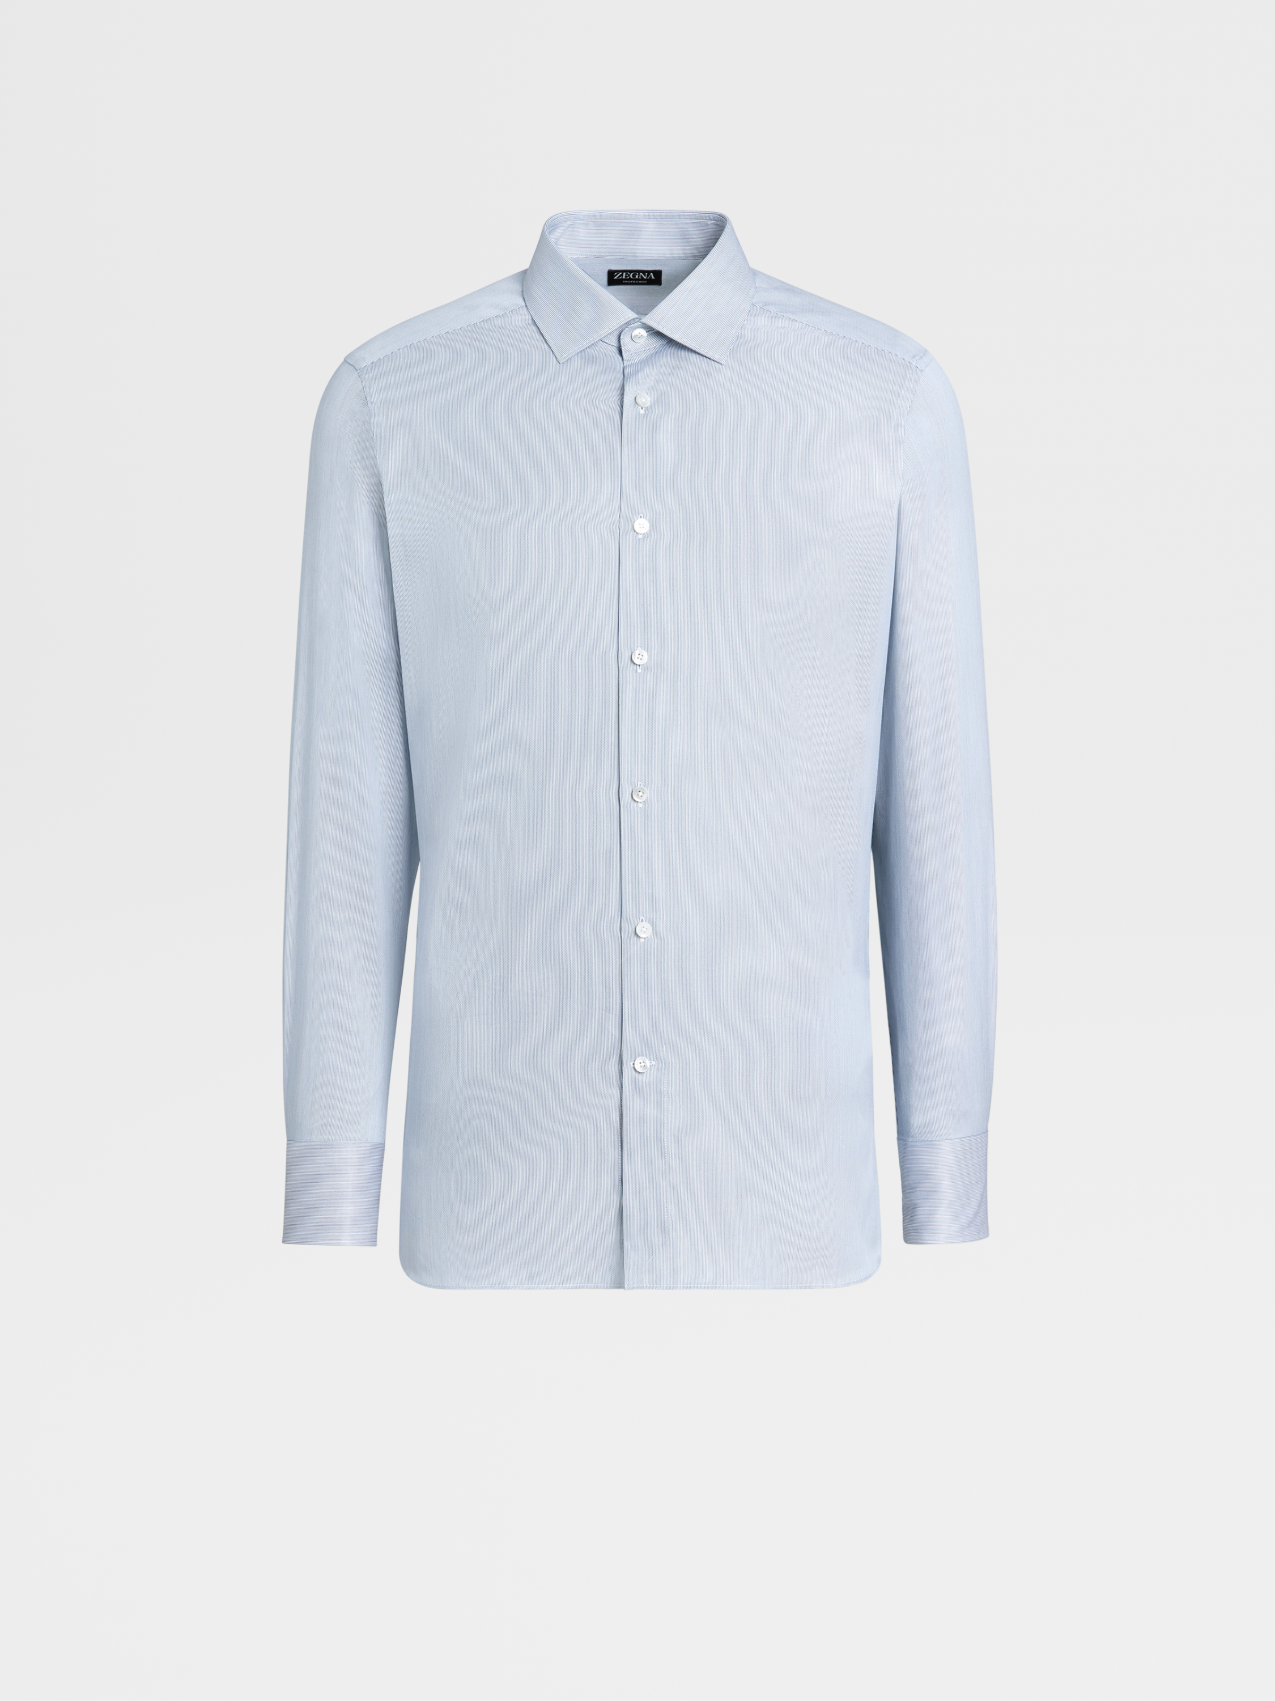 Navy Blue and White Micro-striped Trofeo™ 600 Cotton and Silk Shirt